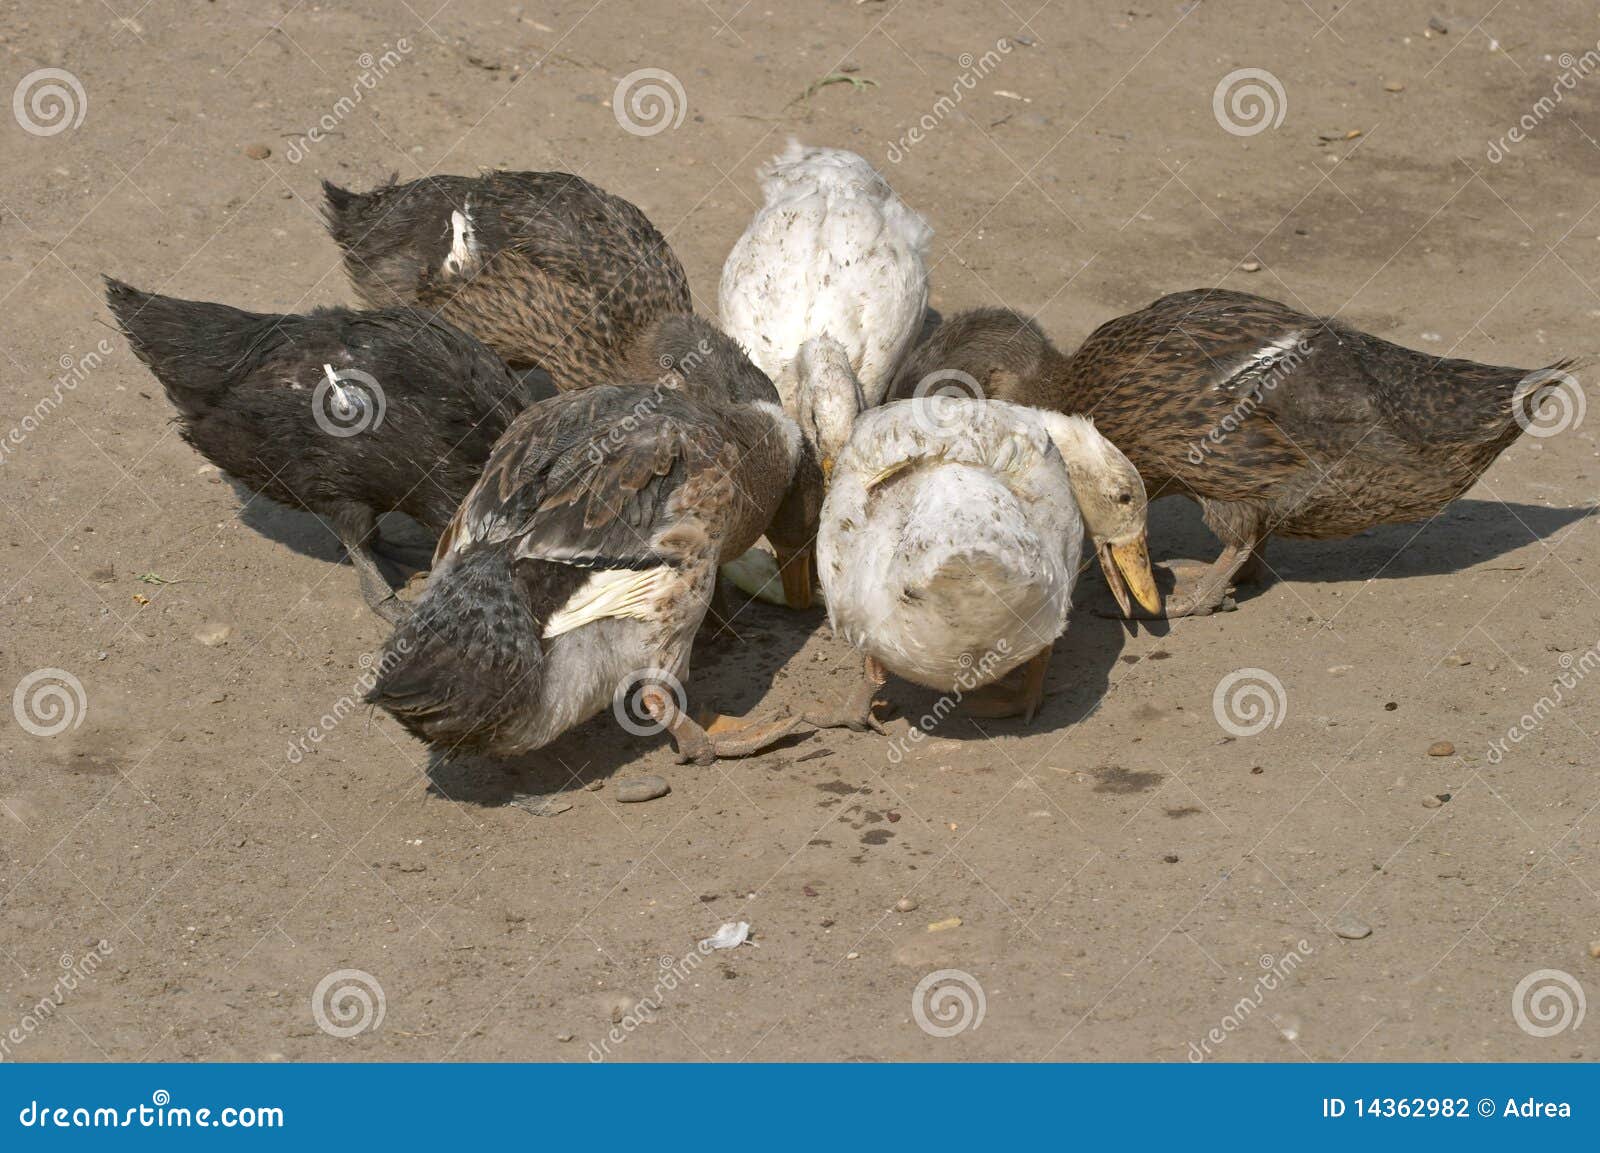 ducks eating something from a bole